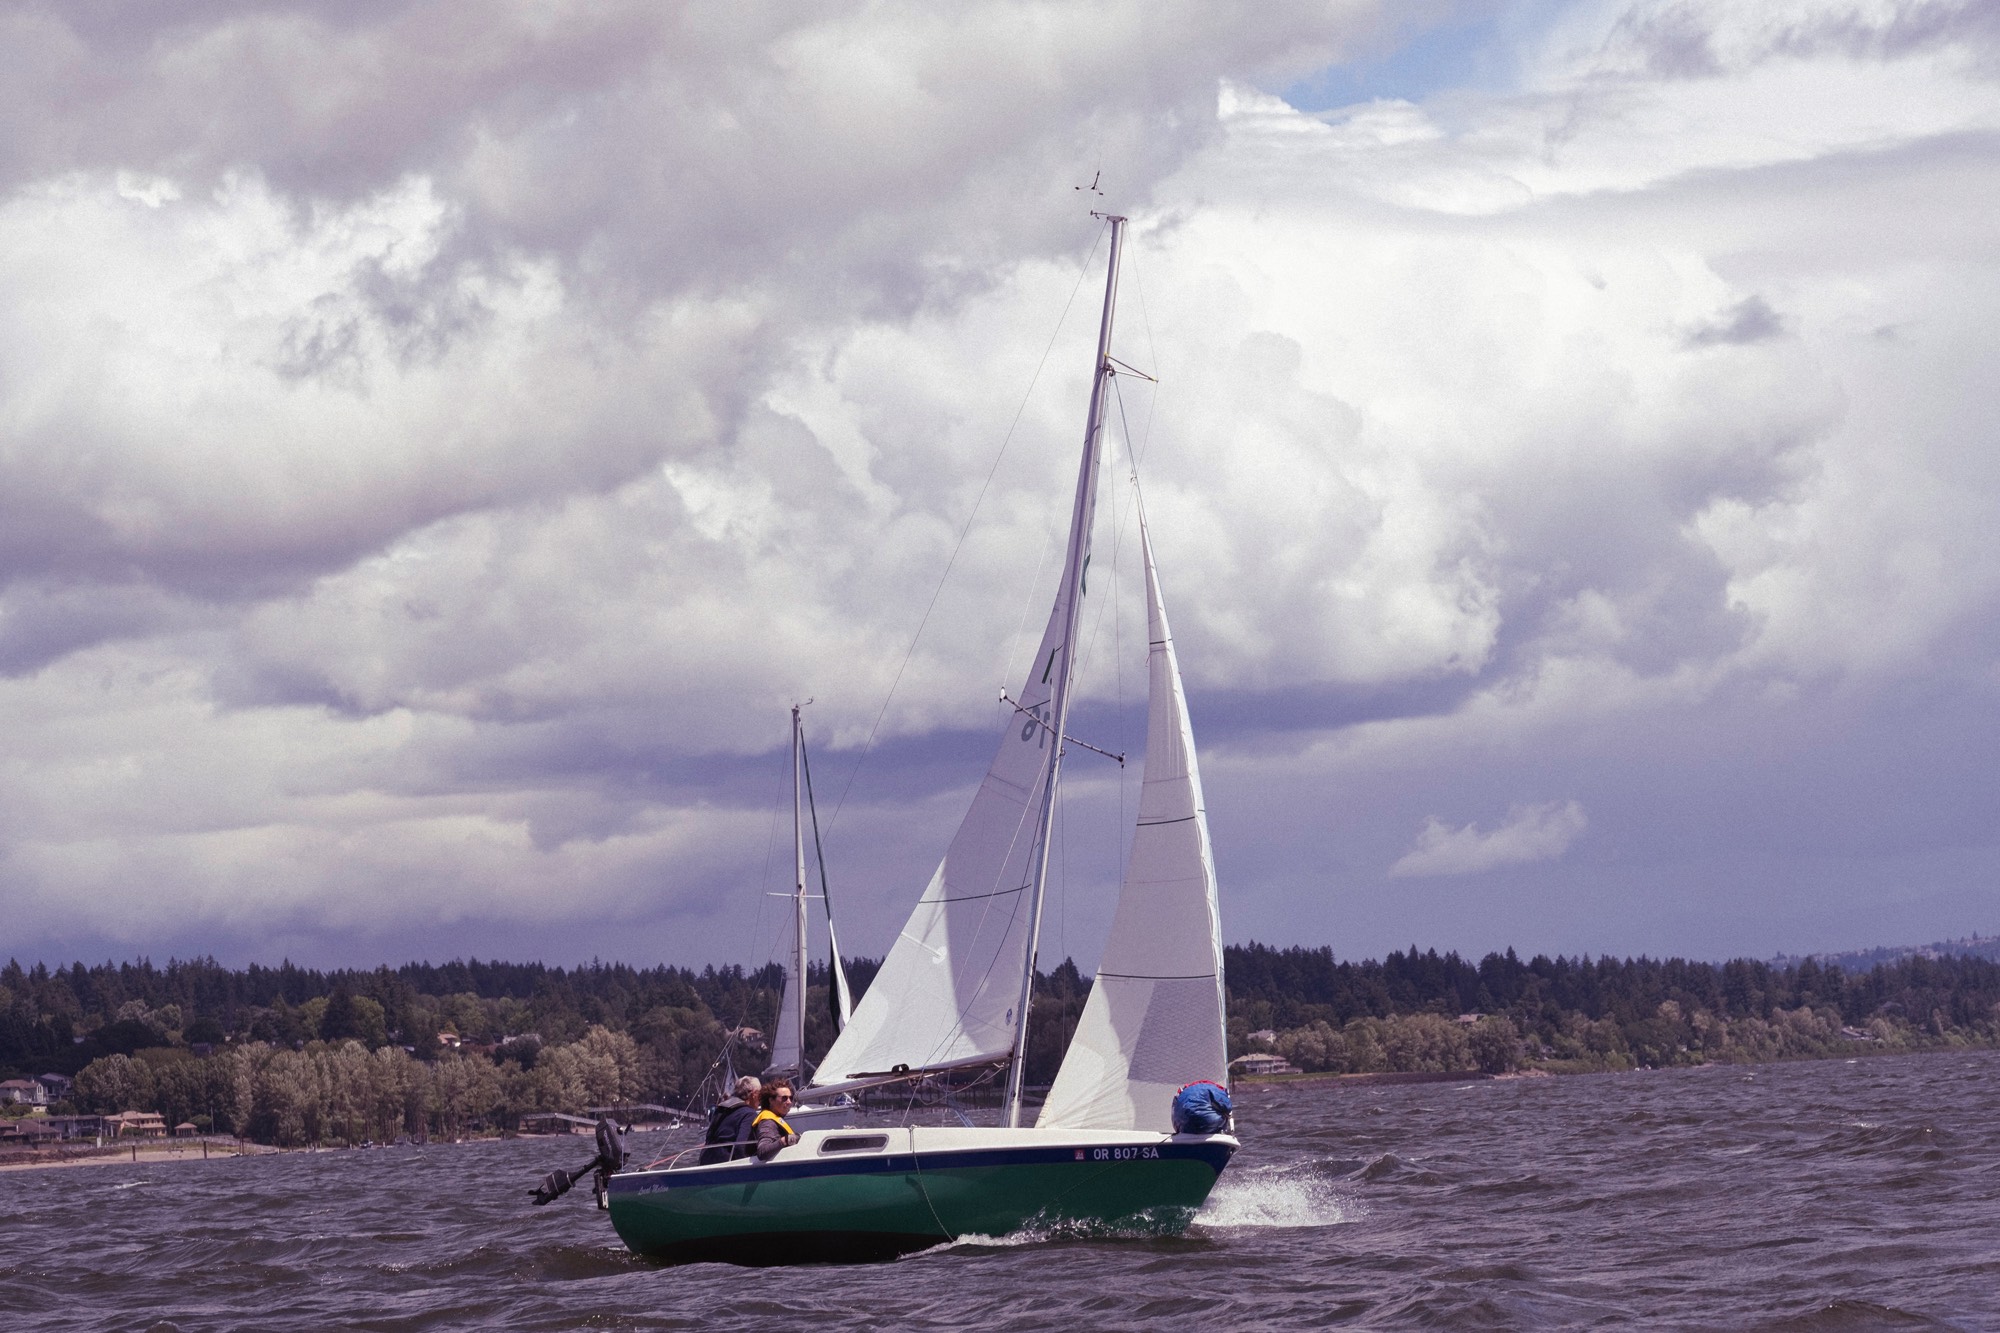 A sailboat on the Columbia river